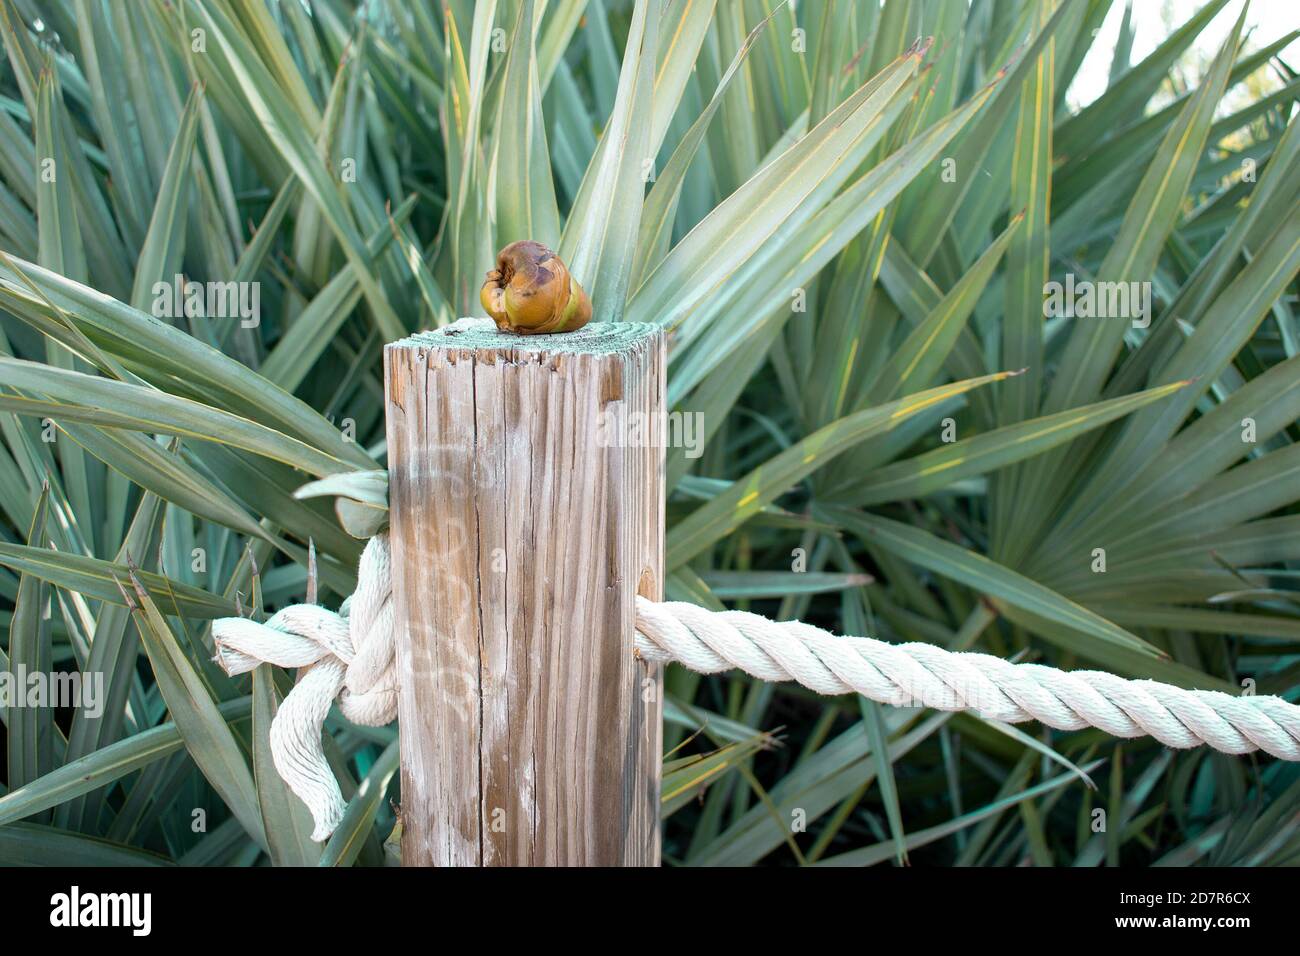 Small coconut on top of a wood trunk Stock Photo